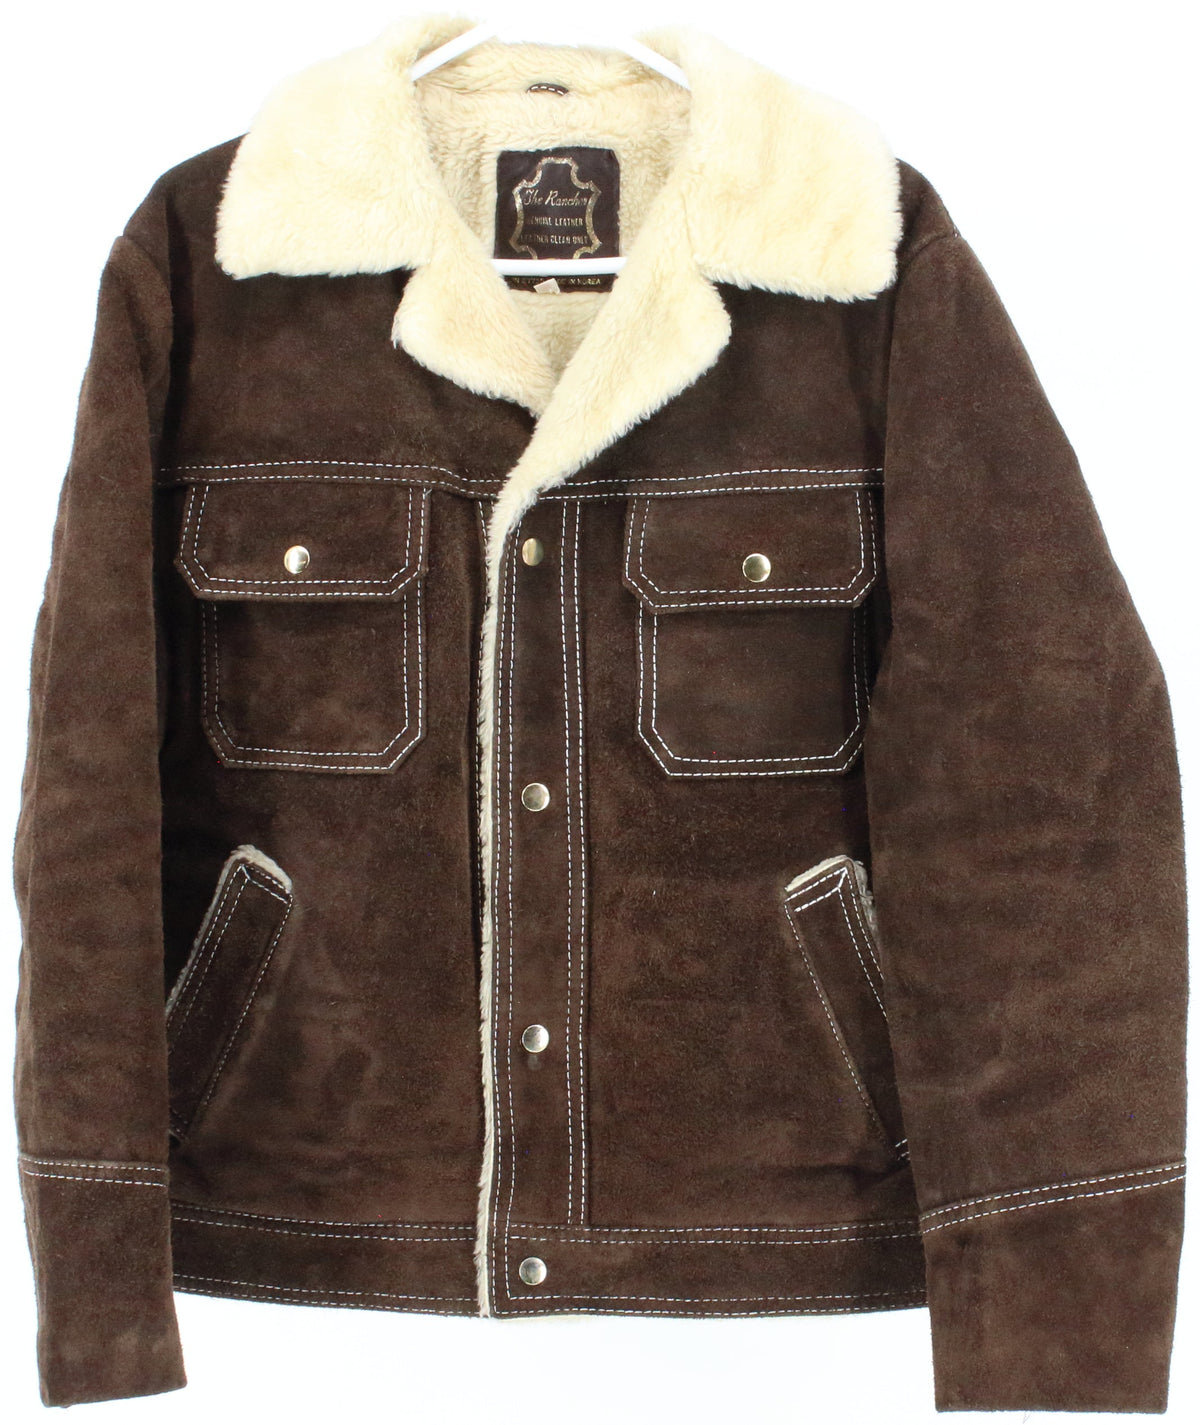 The Rancher Brown Leather Jacket